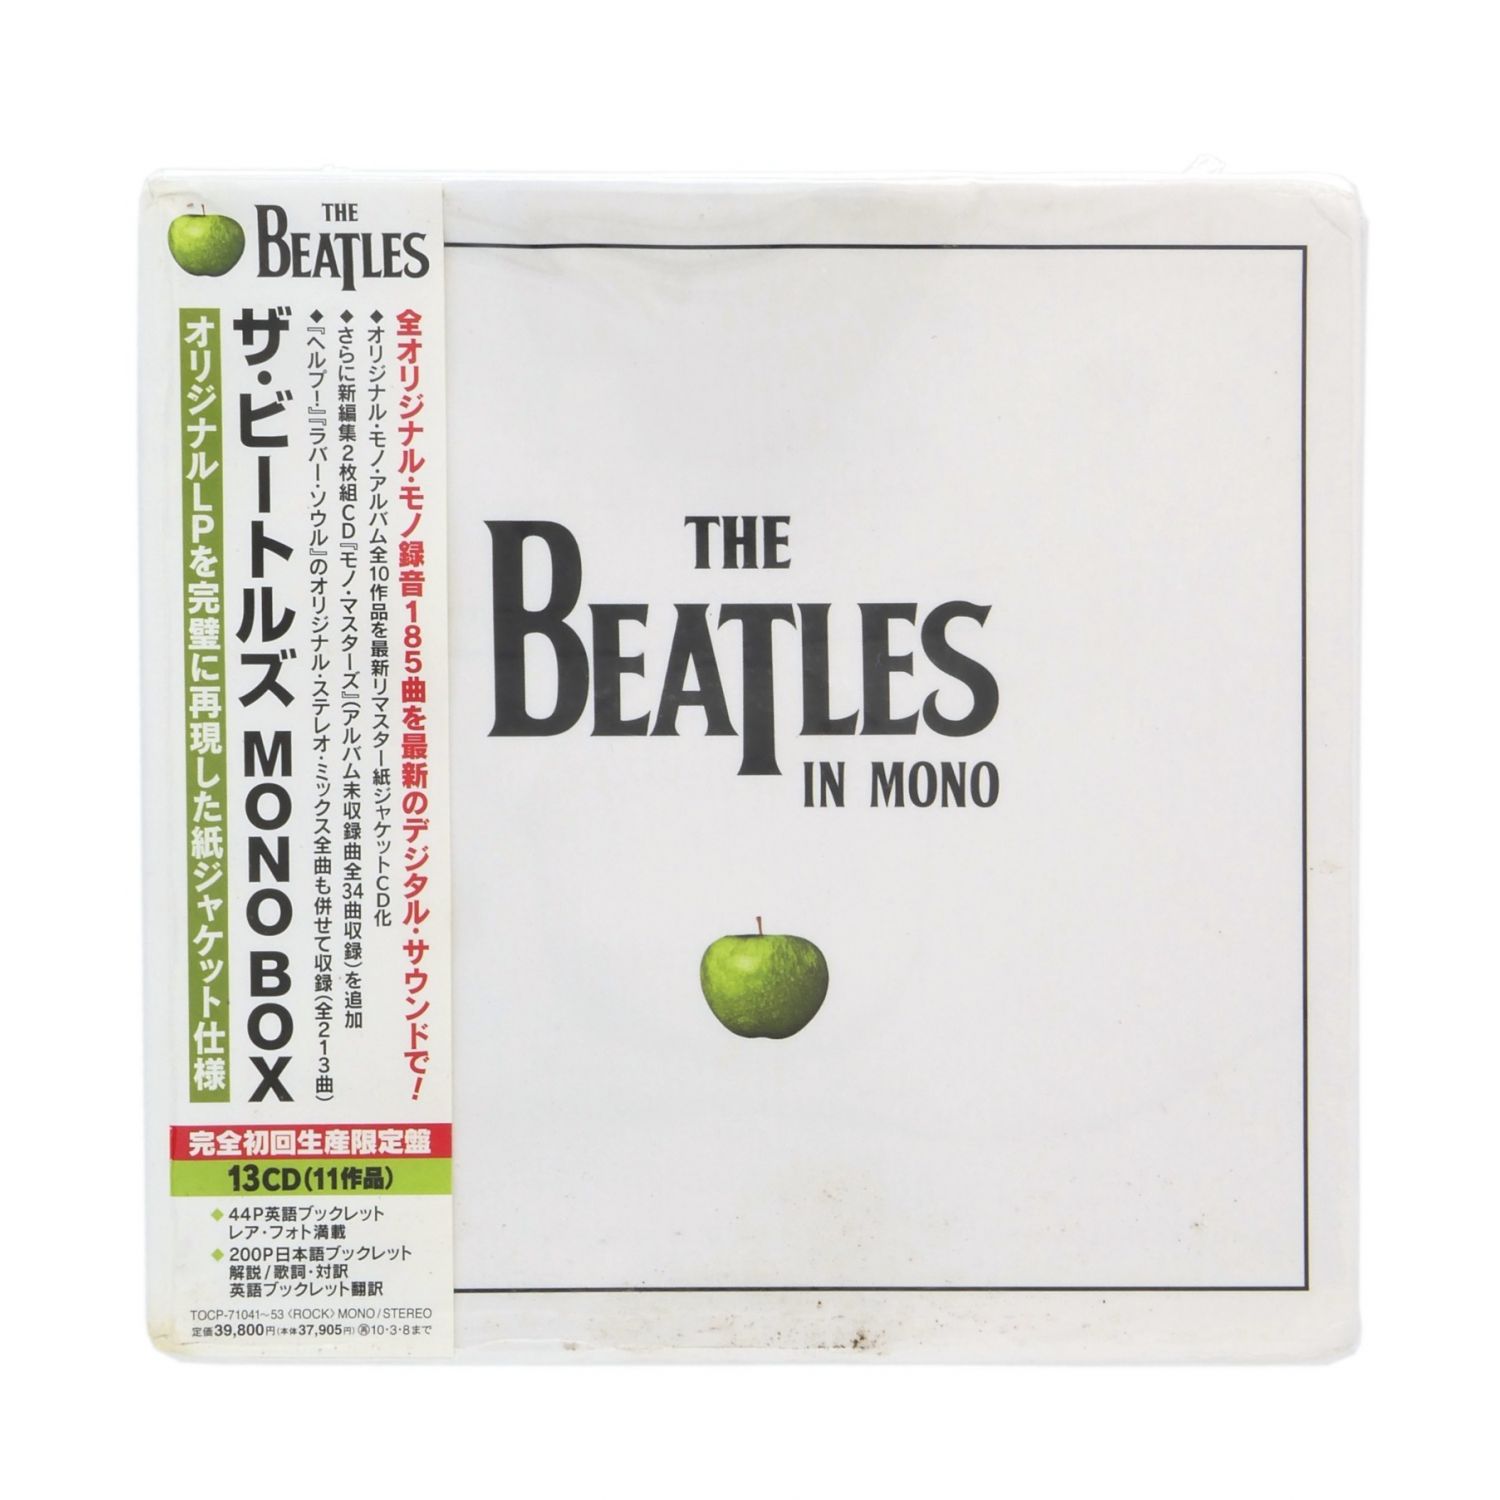 TheBeatles ビートルズ IN MONO レア完全未開封 ビートルズ-